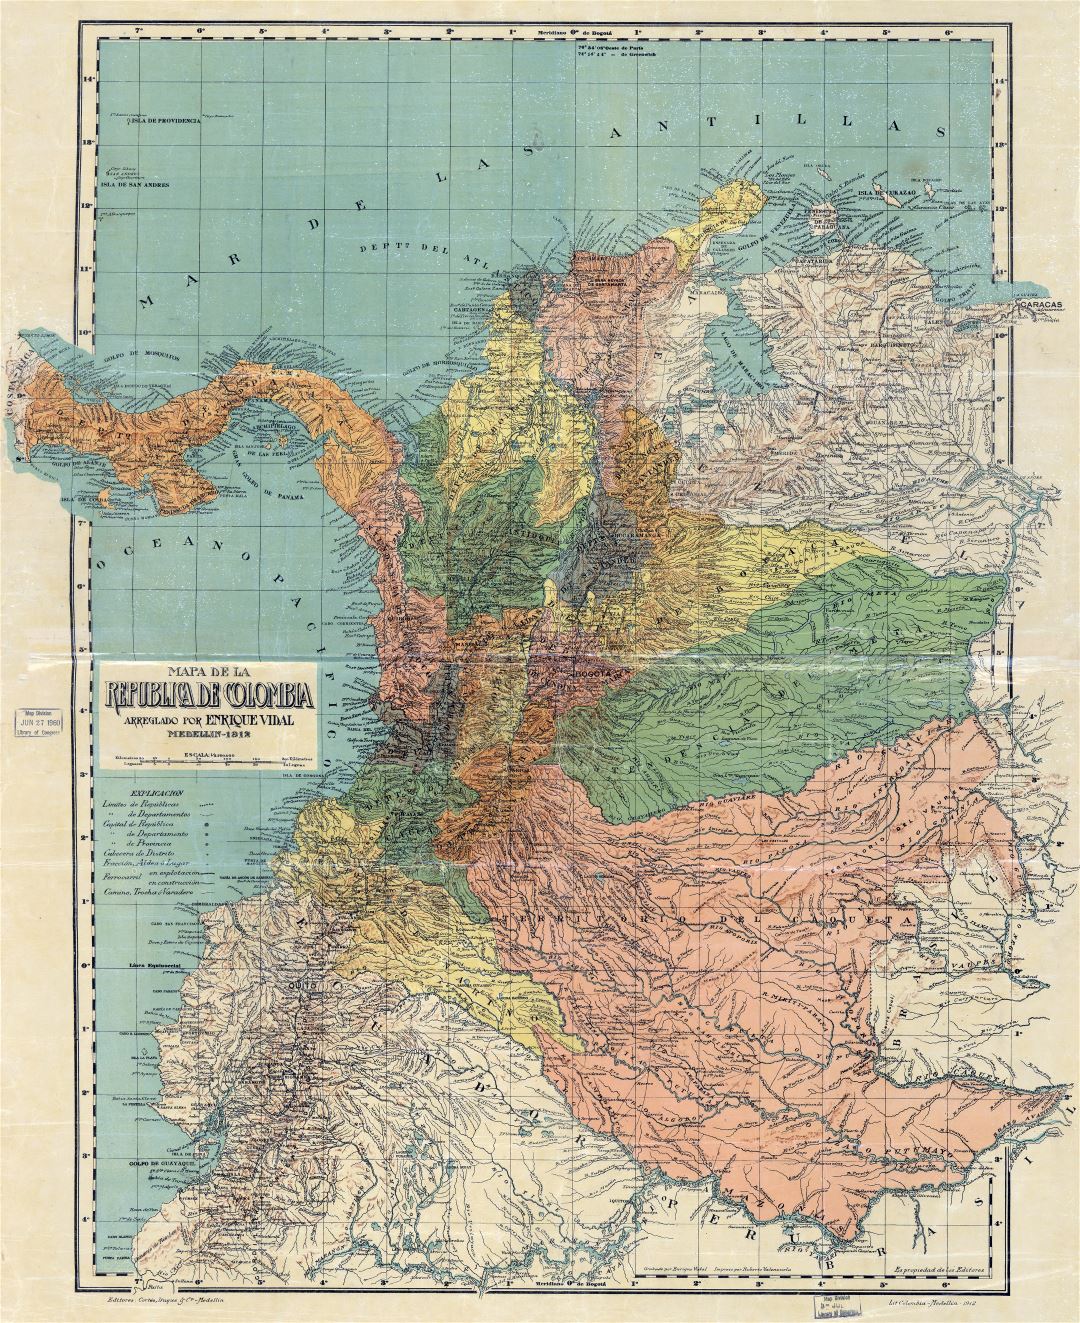 Large scale detailed old political and administrative map of Colombia with relief and other marks - 1912